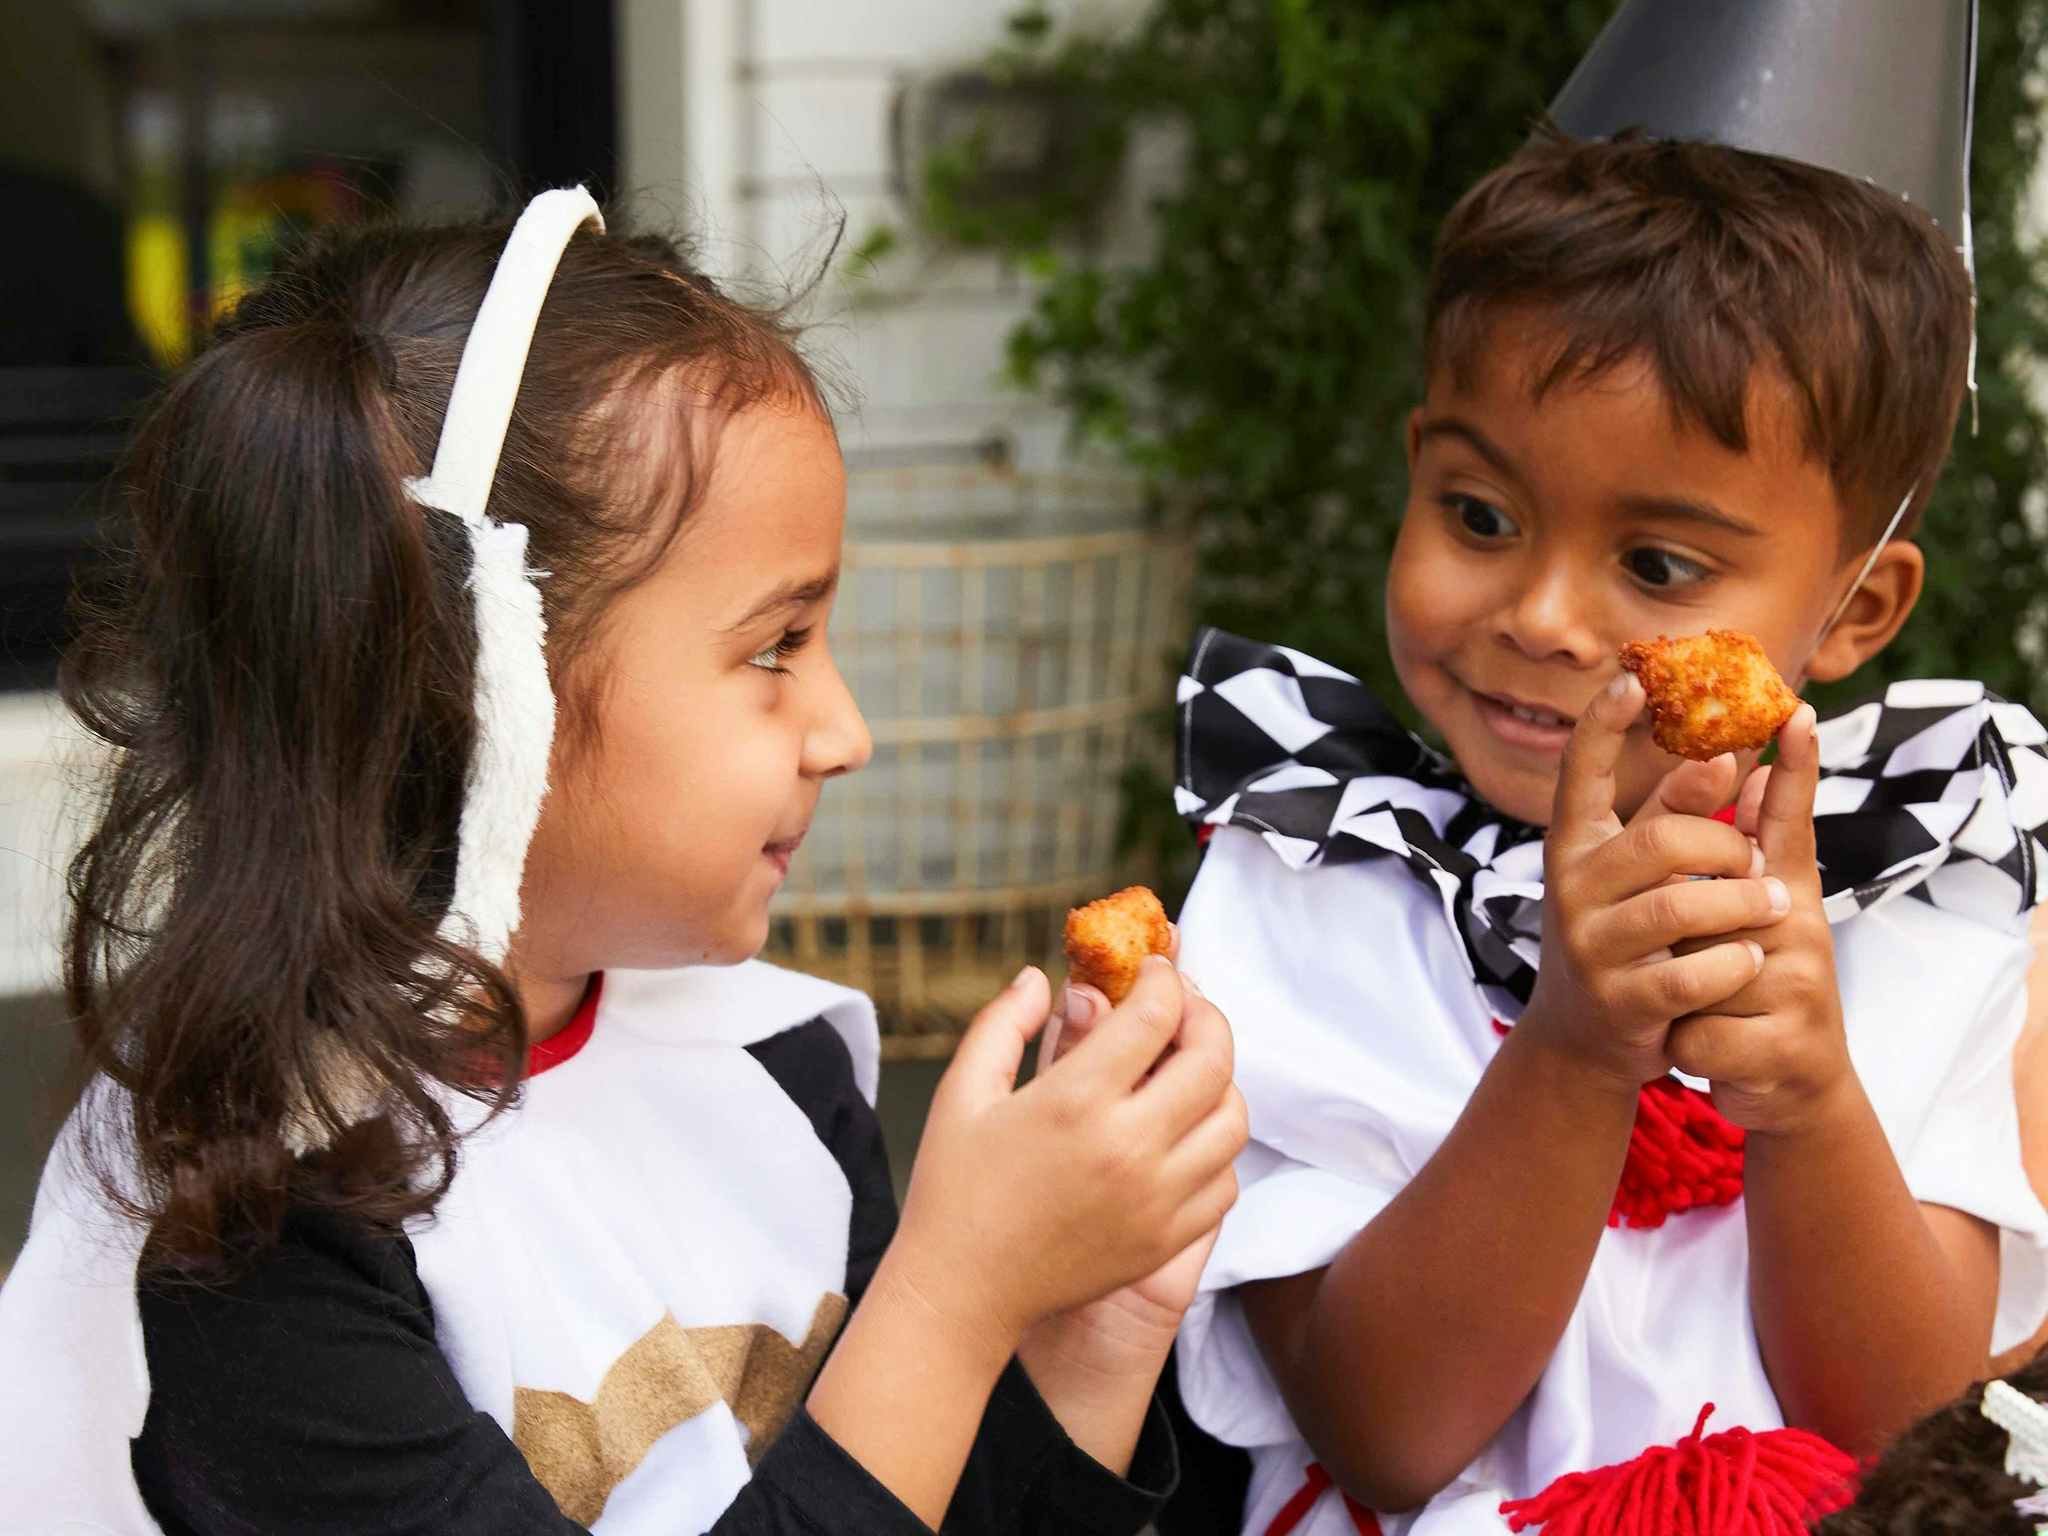 Two children dressed up eating Chick-Fil-A Chicken nuggets